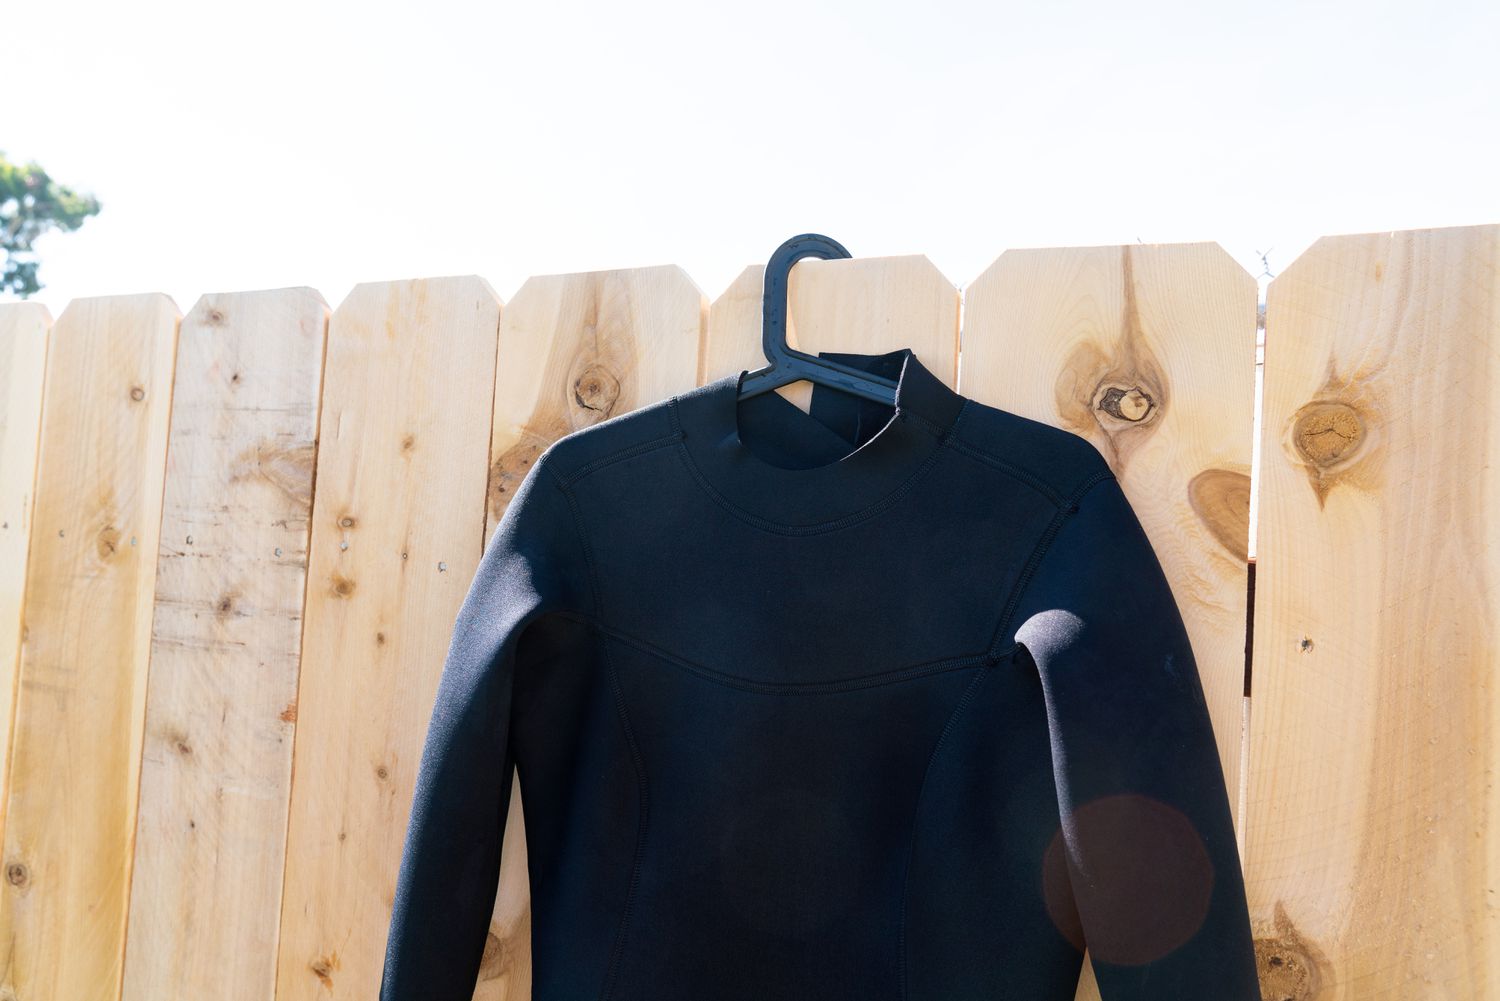 Heavy padded hanger in black wet suit hanging on wooden fence to air dry